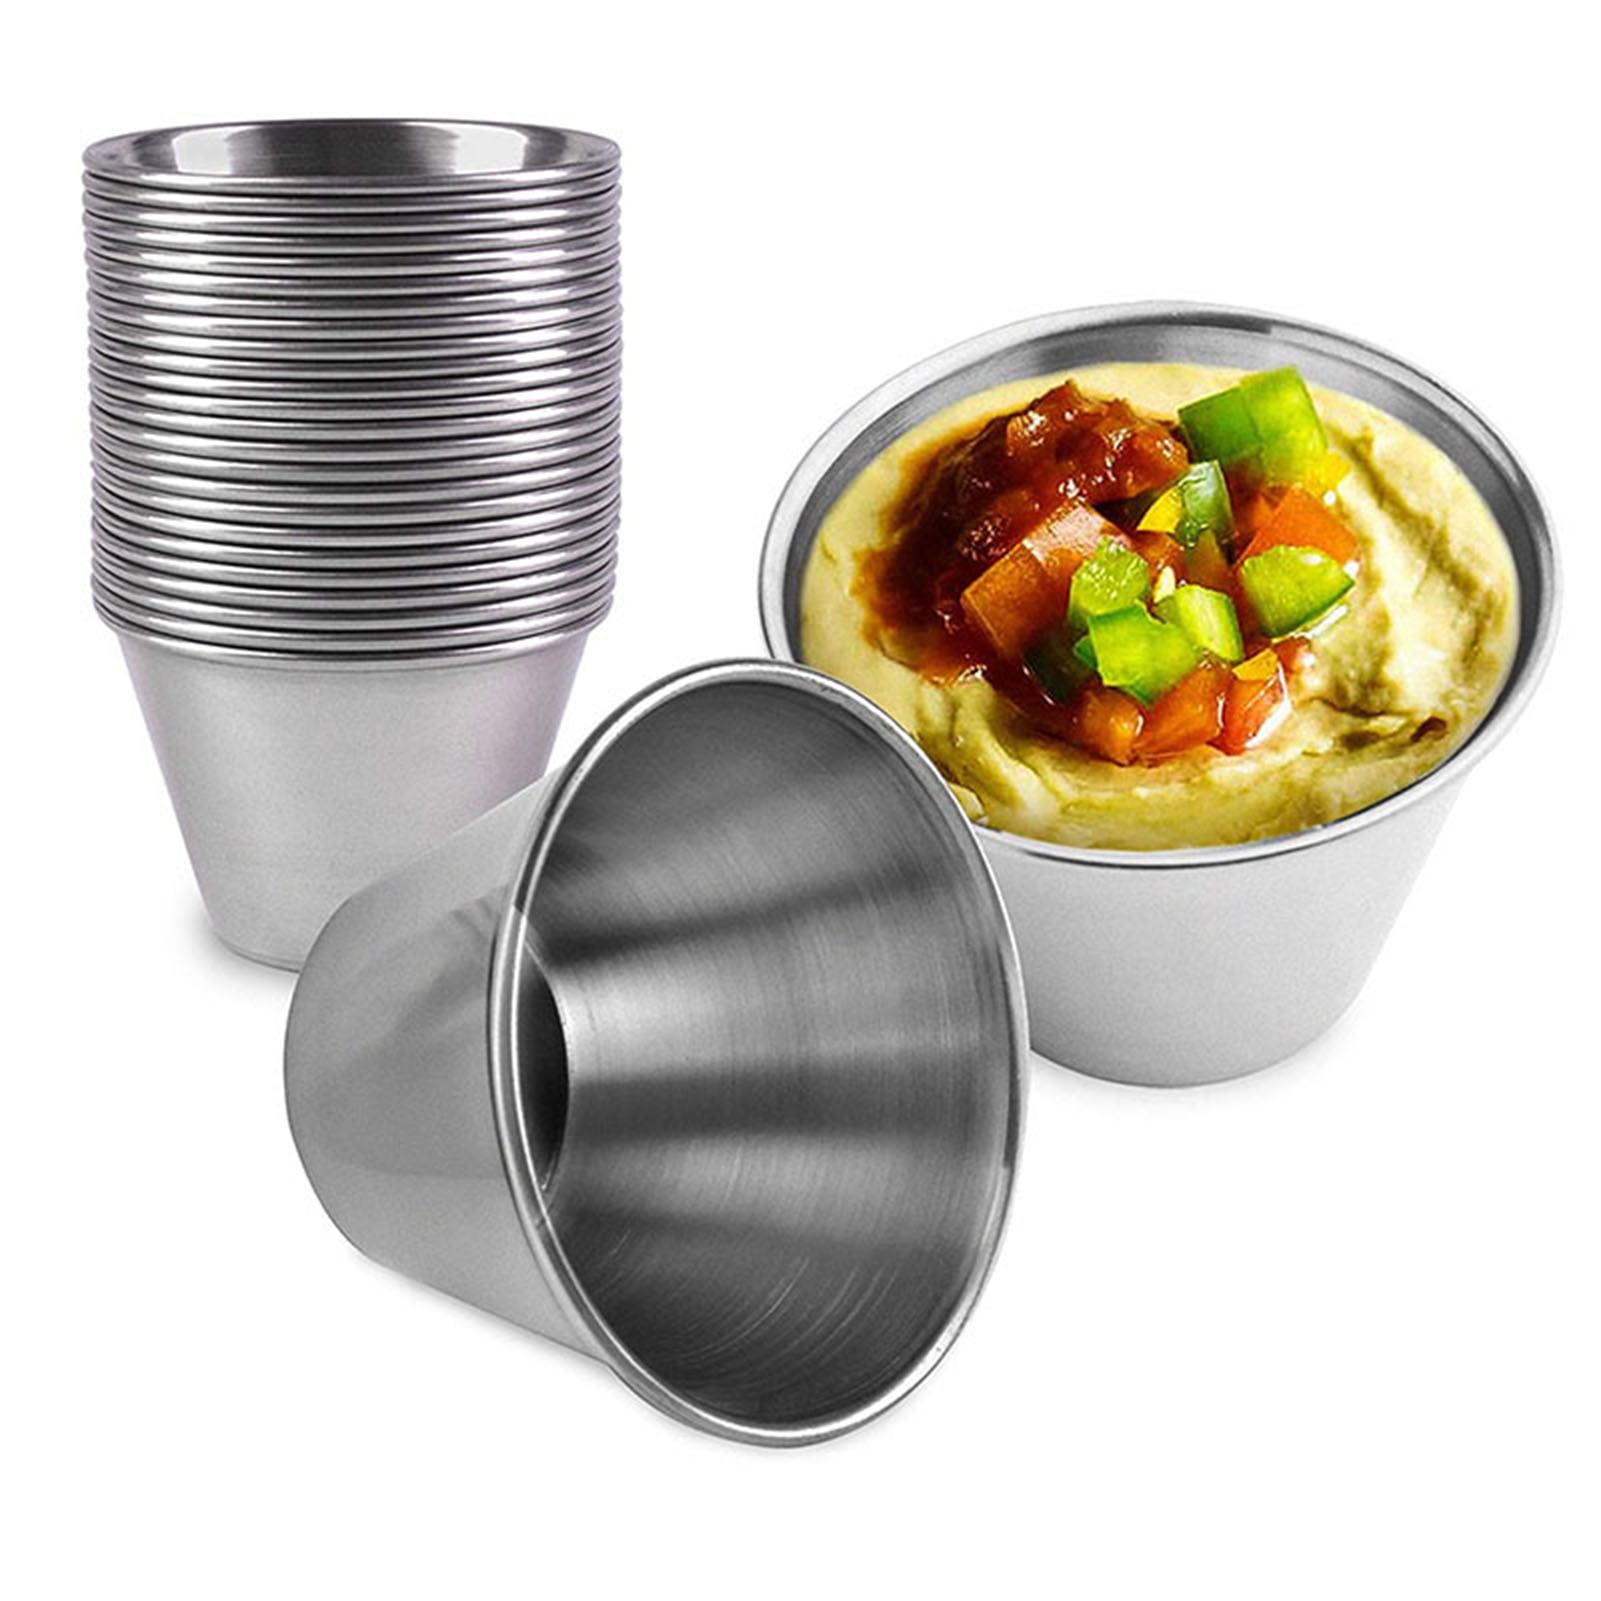 Gravy Dipping Cup